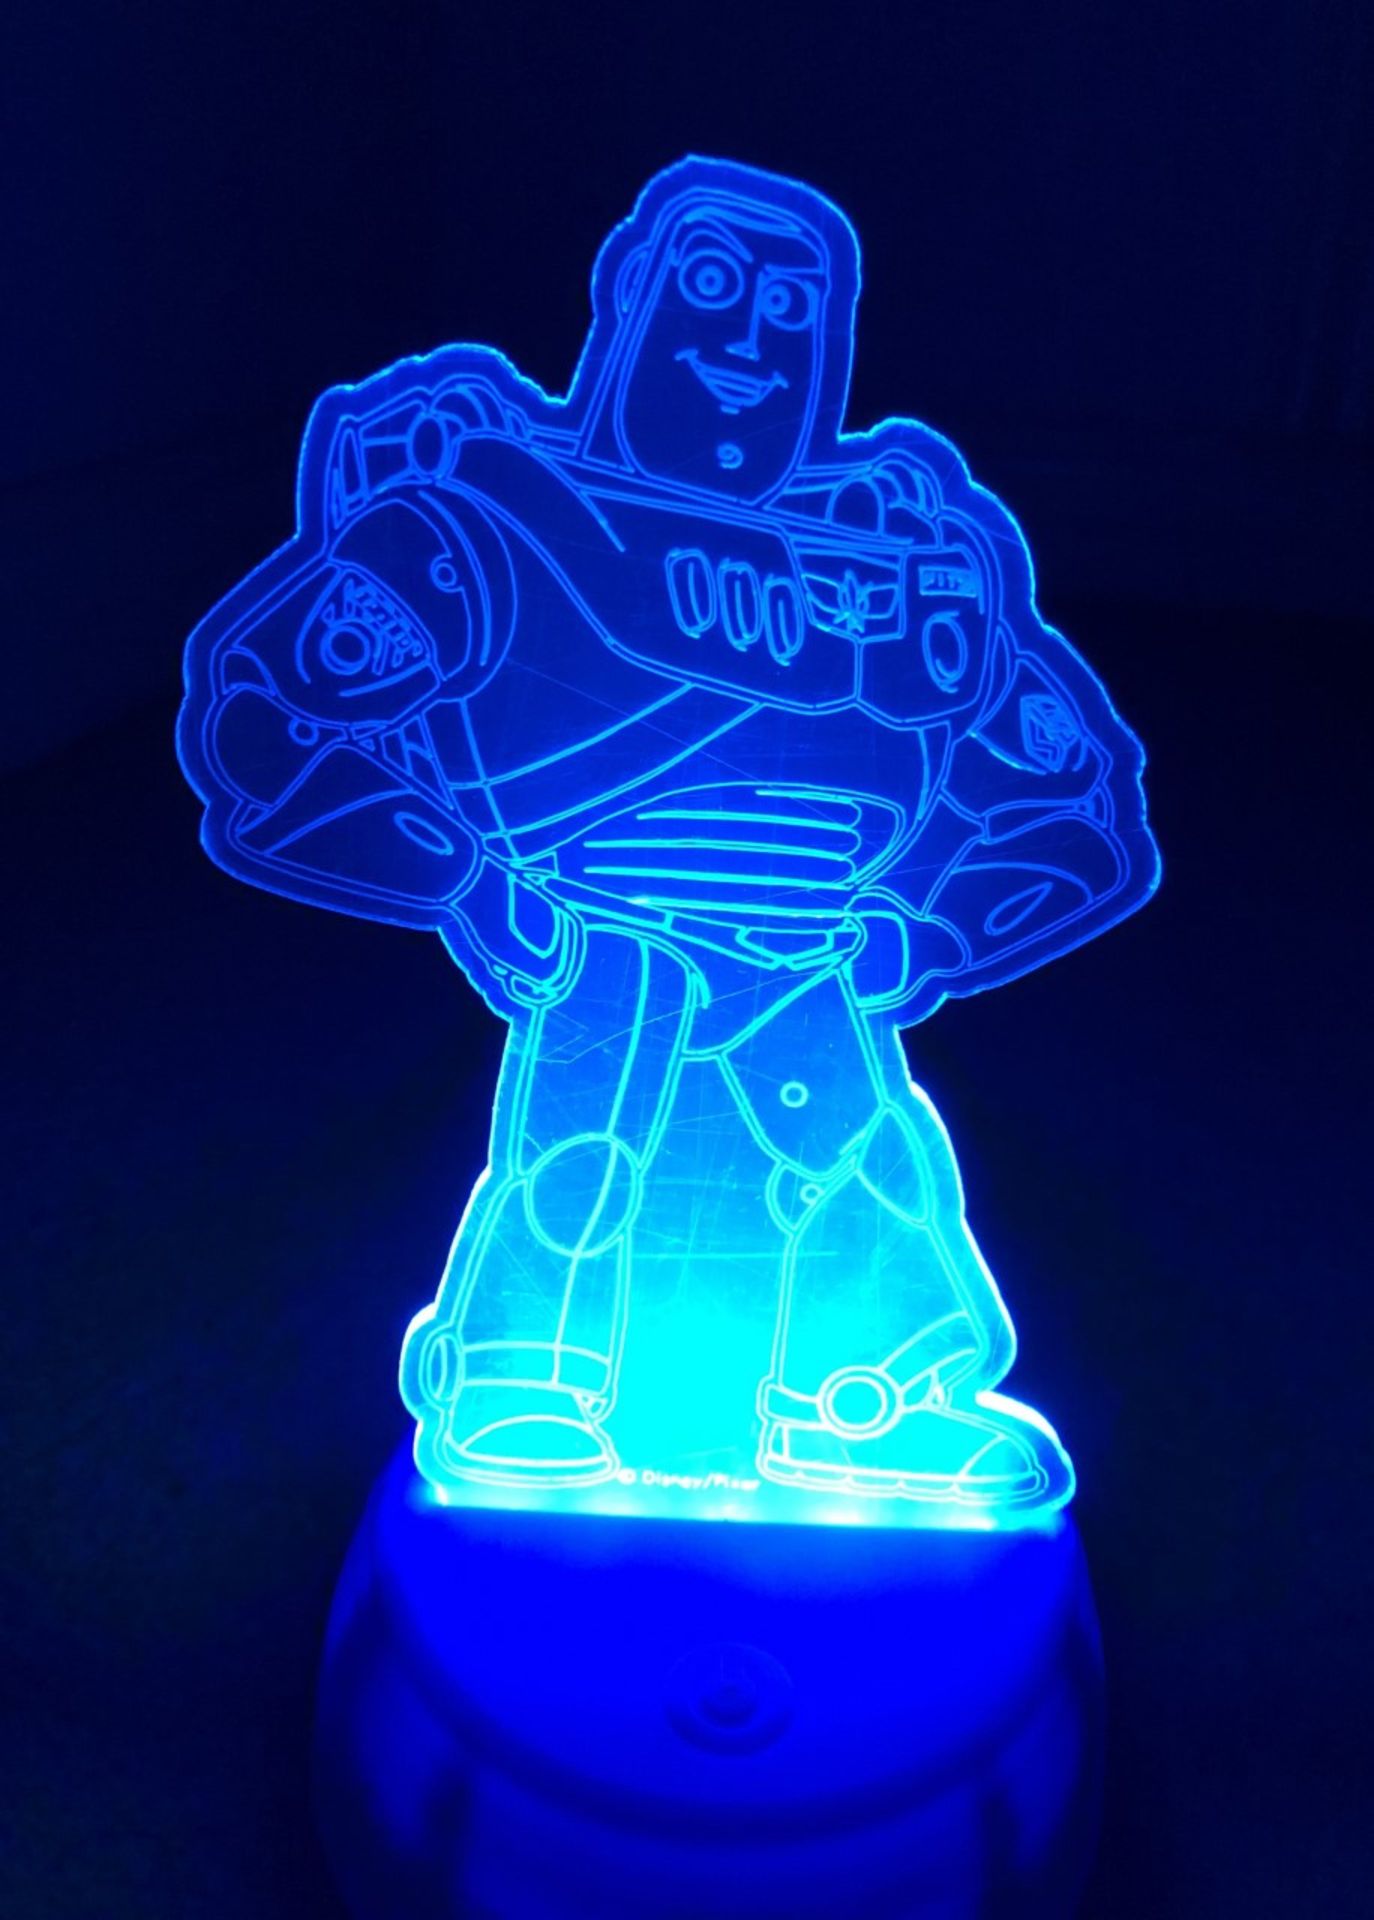 Disney Pixar Toy Story 4 Colour Changing Laser Etched Nightlights X234 Buzz, Woody & Rex - Image 4 of 5